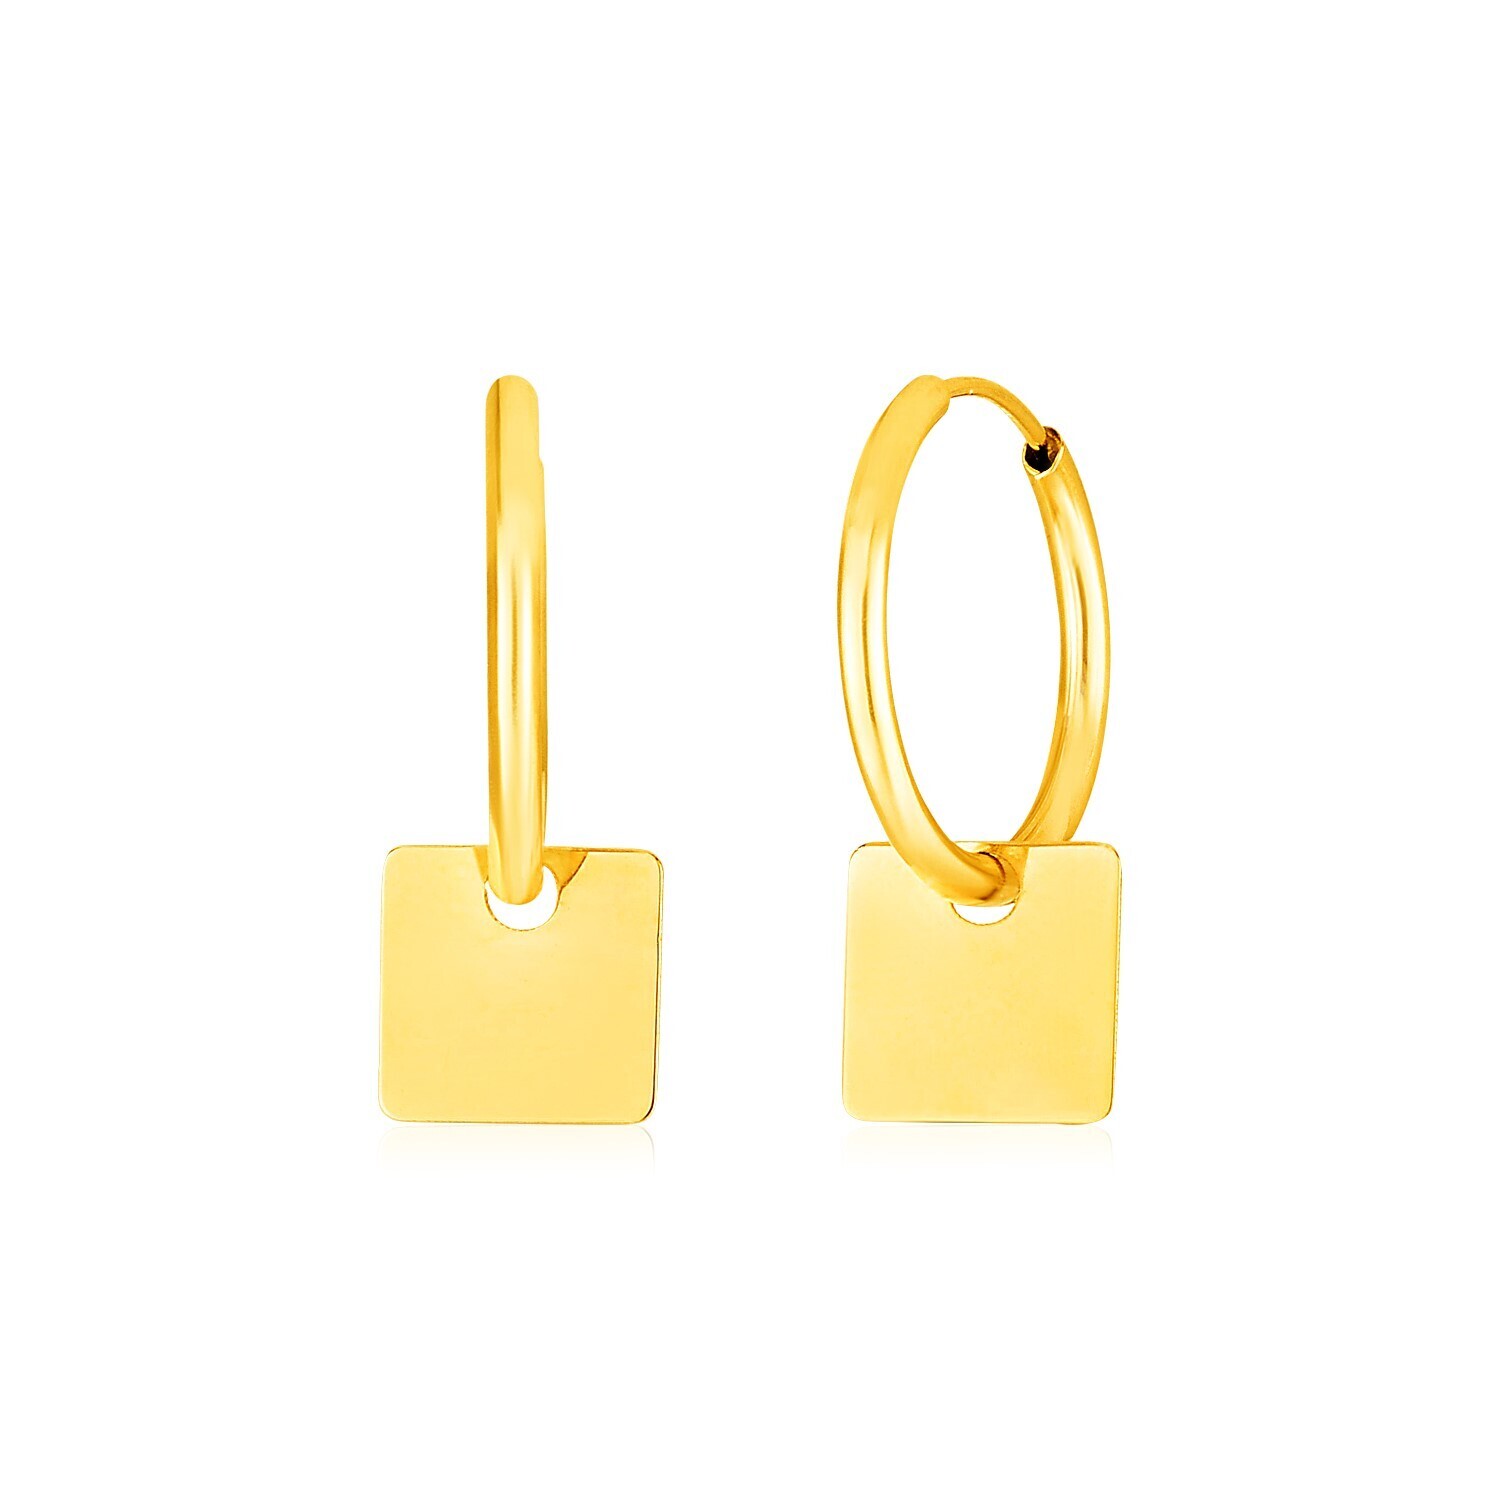 14k Yellow Gold Huggie Style Hoop Earrings with Square Drops